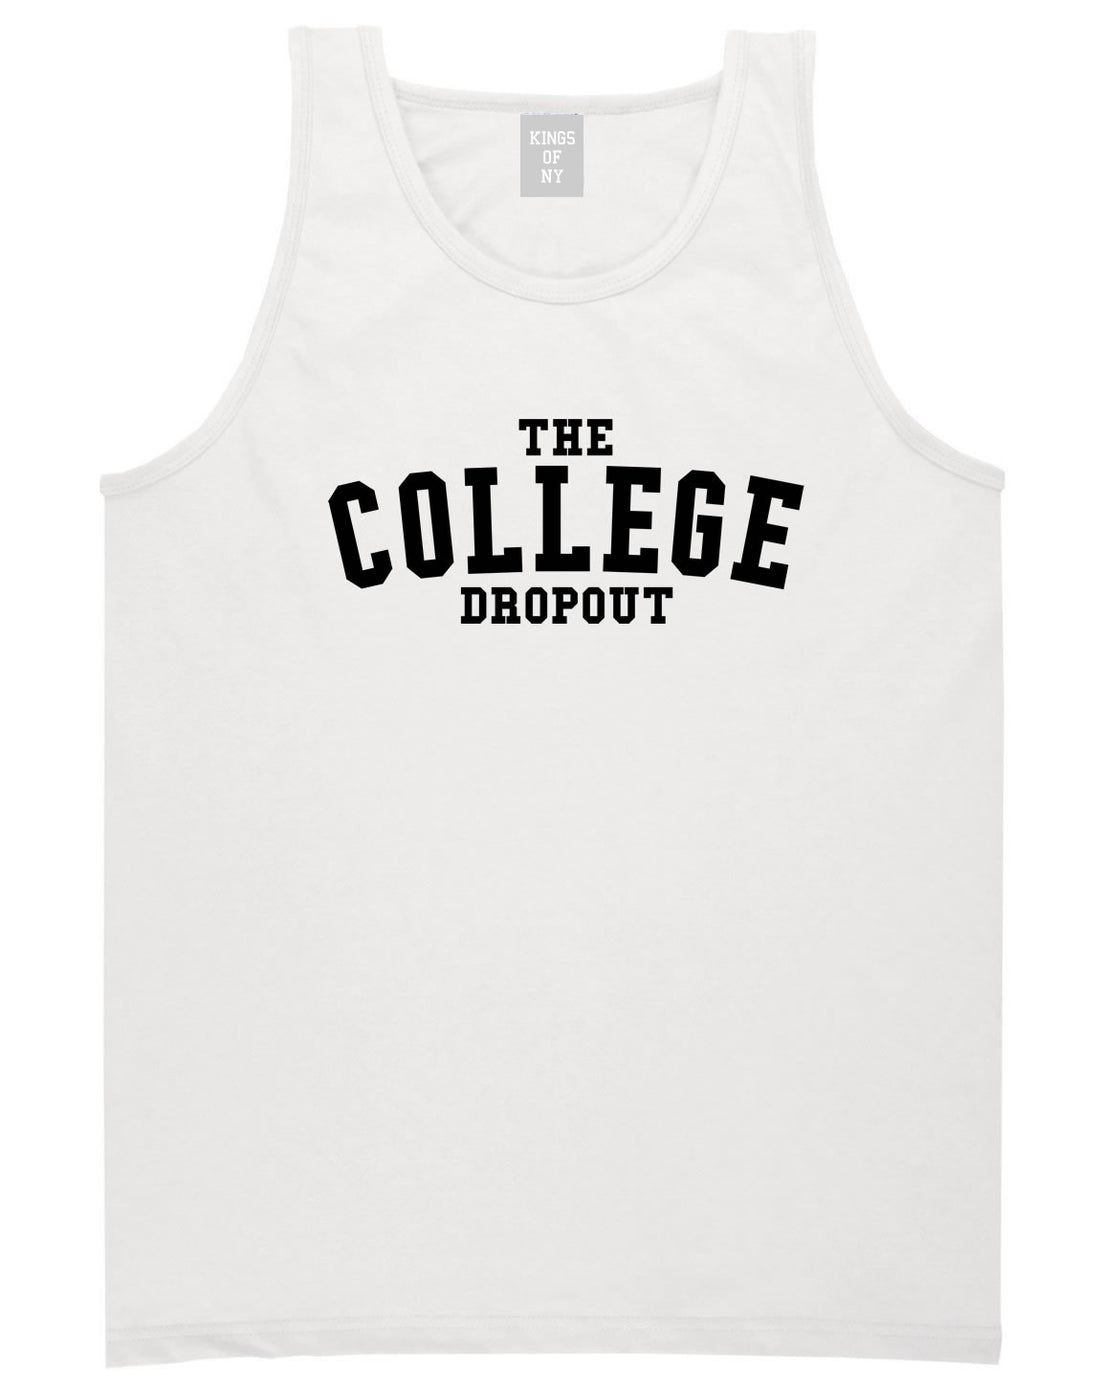 The College Dropout Album High School Tank Top in White By Kings Of NY